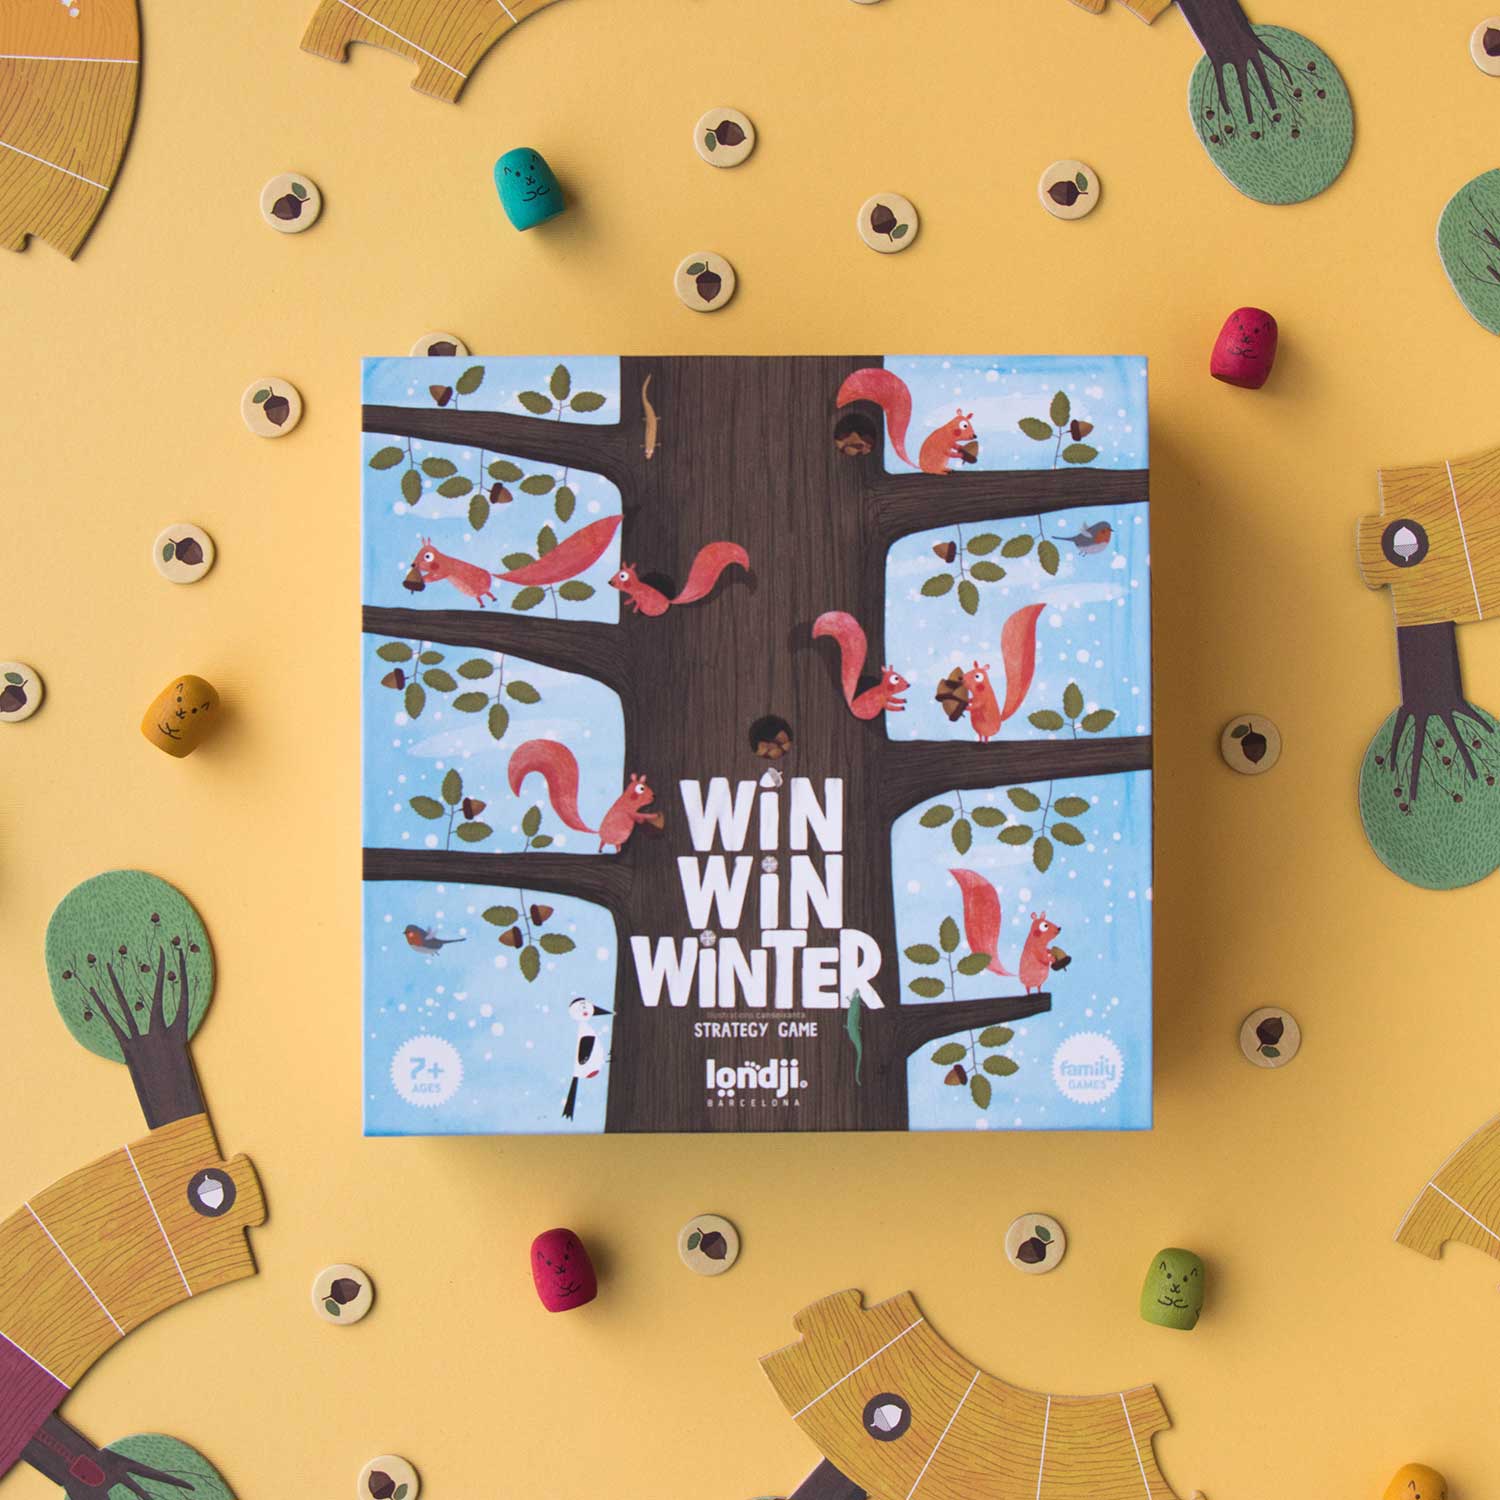 Image shows an overhead view of the Win Win Winter game box, illustrated with a tall tree with many squirrels scampering across the branches. The box is surrounded by board game pieces. Shown against a yellow backdrop.